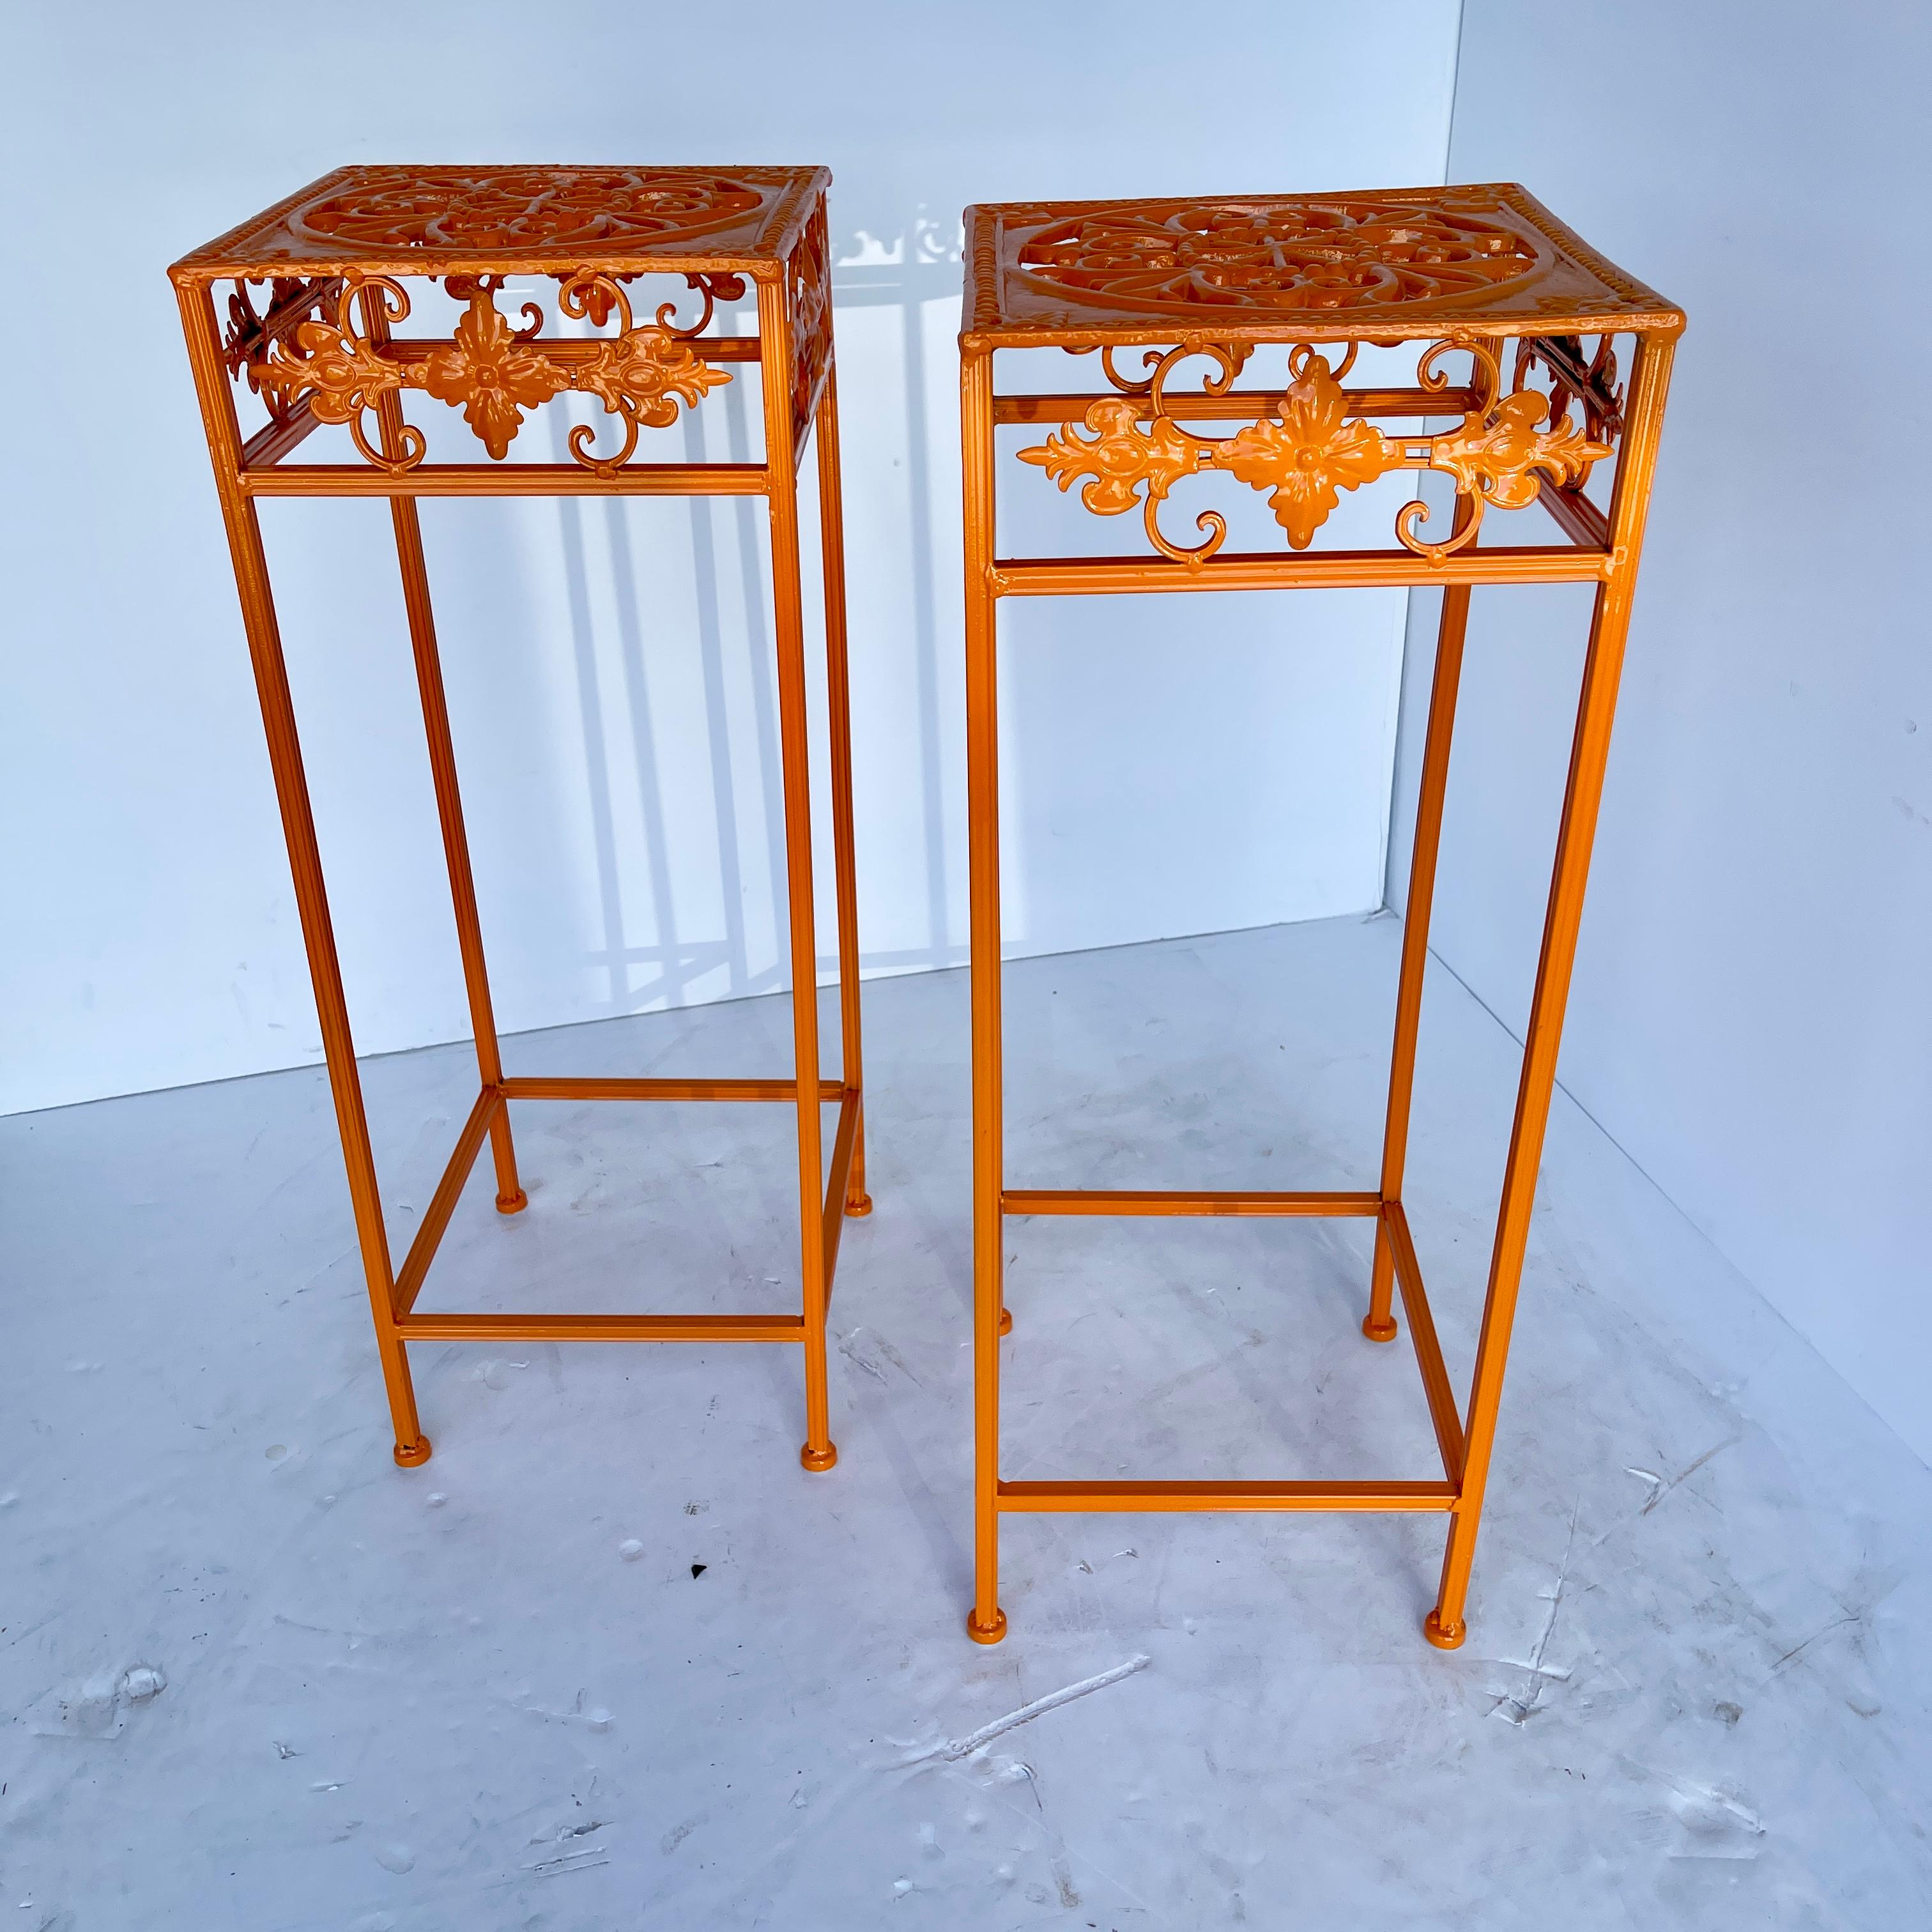 Late 20th Century Pair of Plant Stands, Powder-Coated Orange